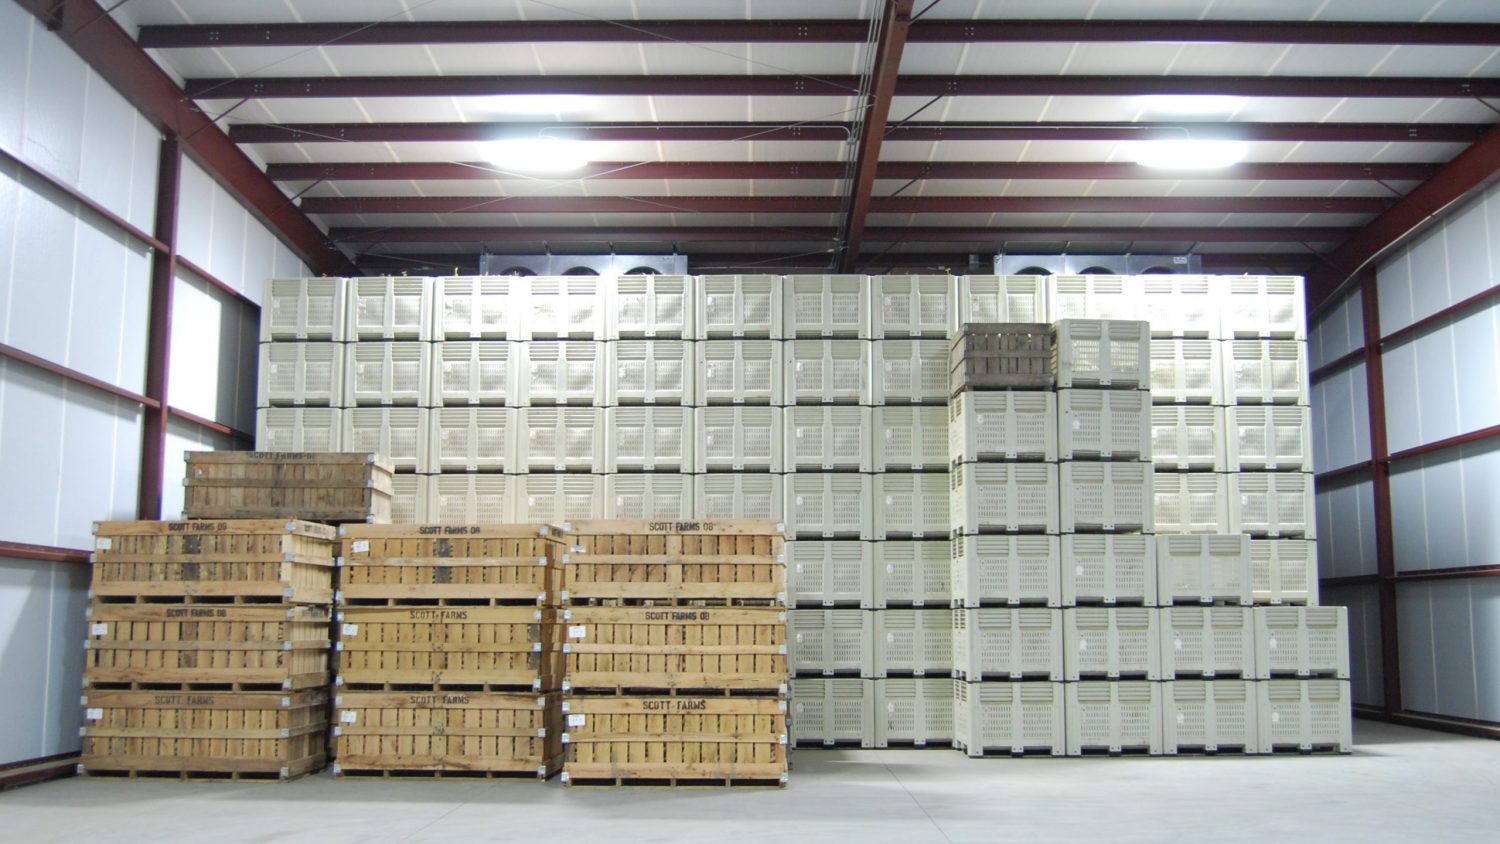 Large warehouse space with bins lined from wall to wall and floor to ceiling